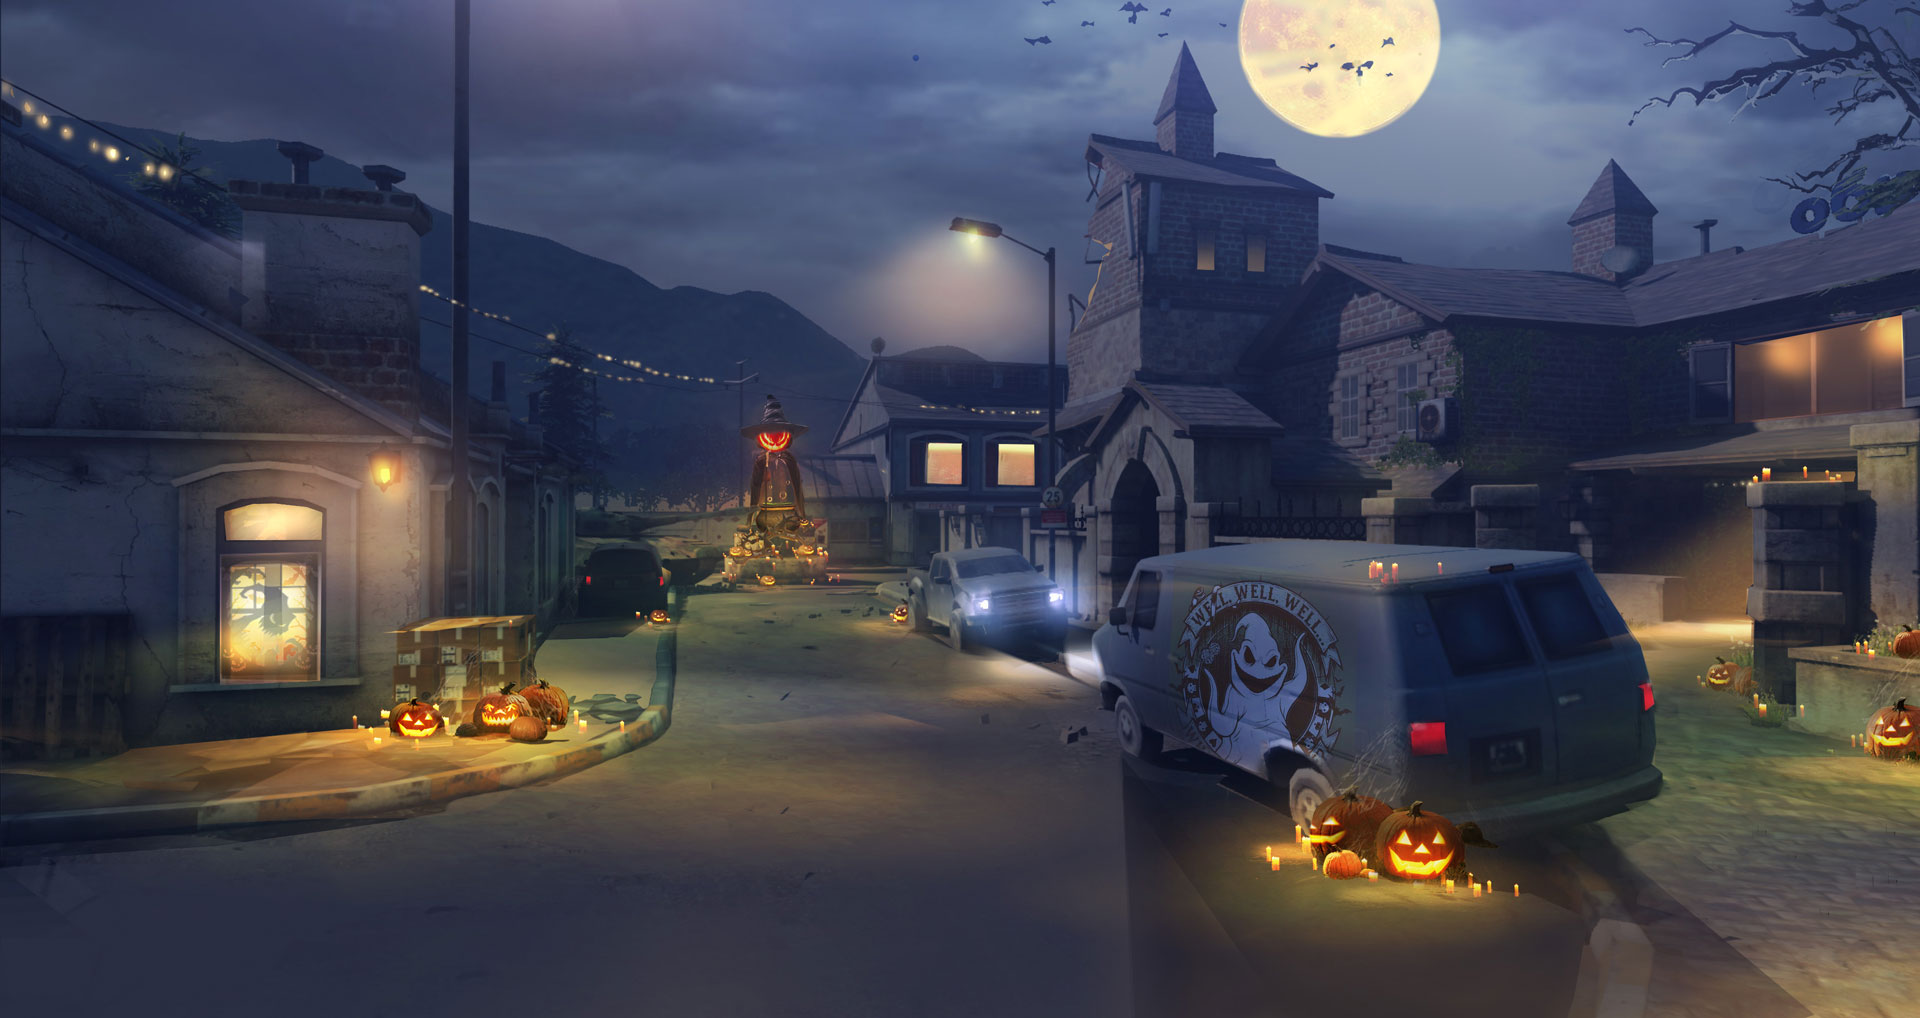 Call of Duty®: Mobile Halloween Event is All Treats, No Tricks starting on  October 21.